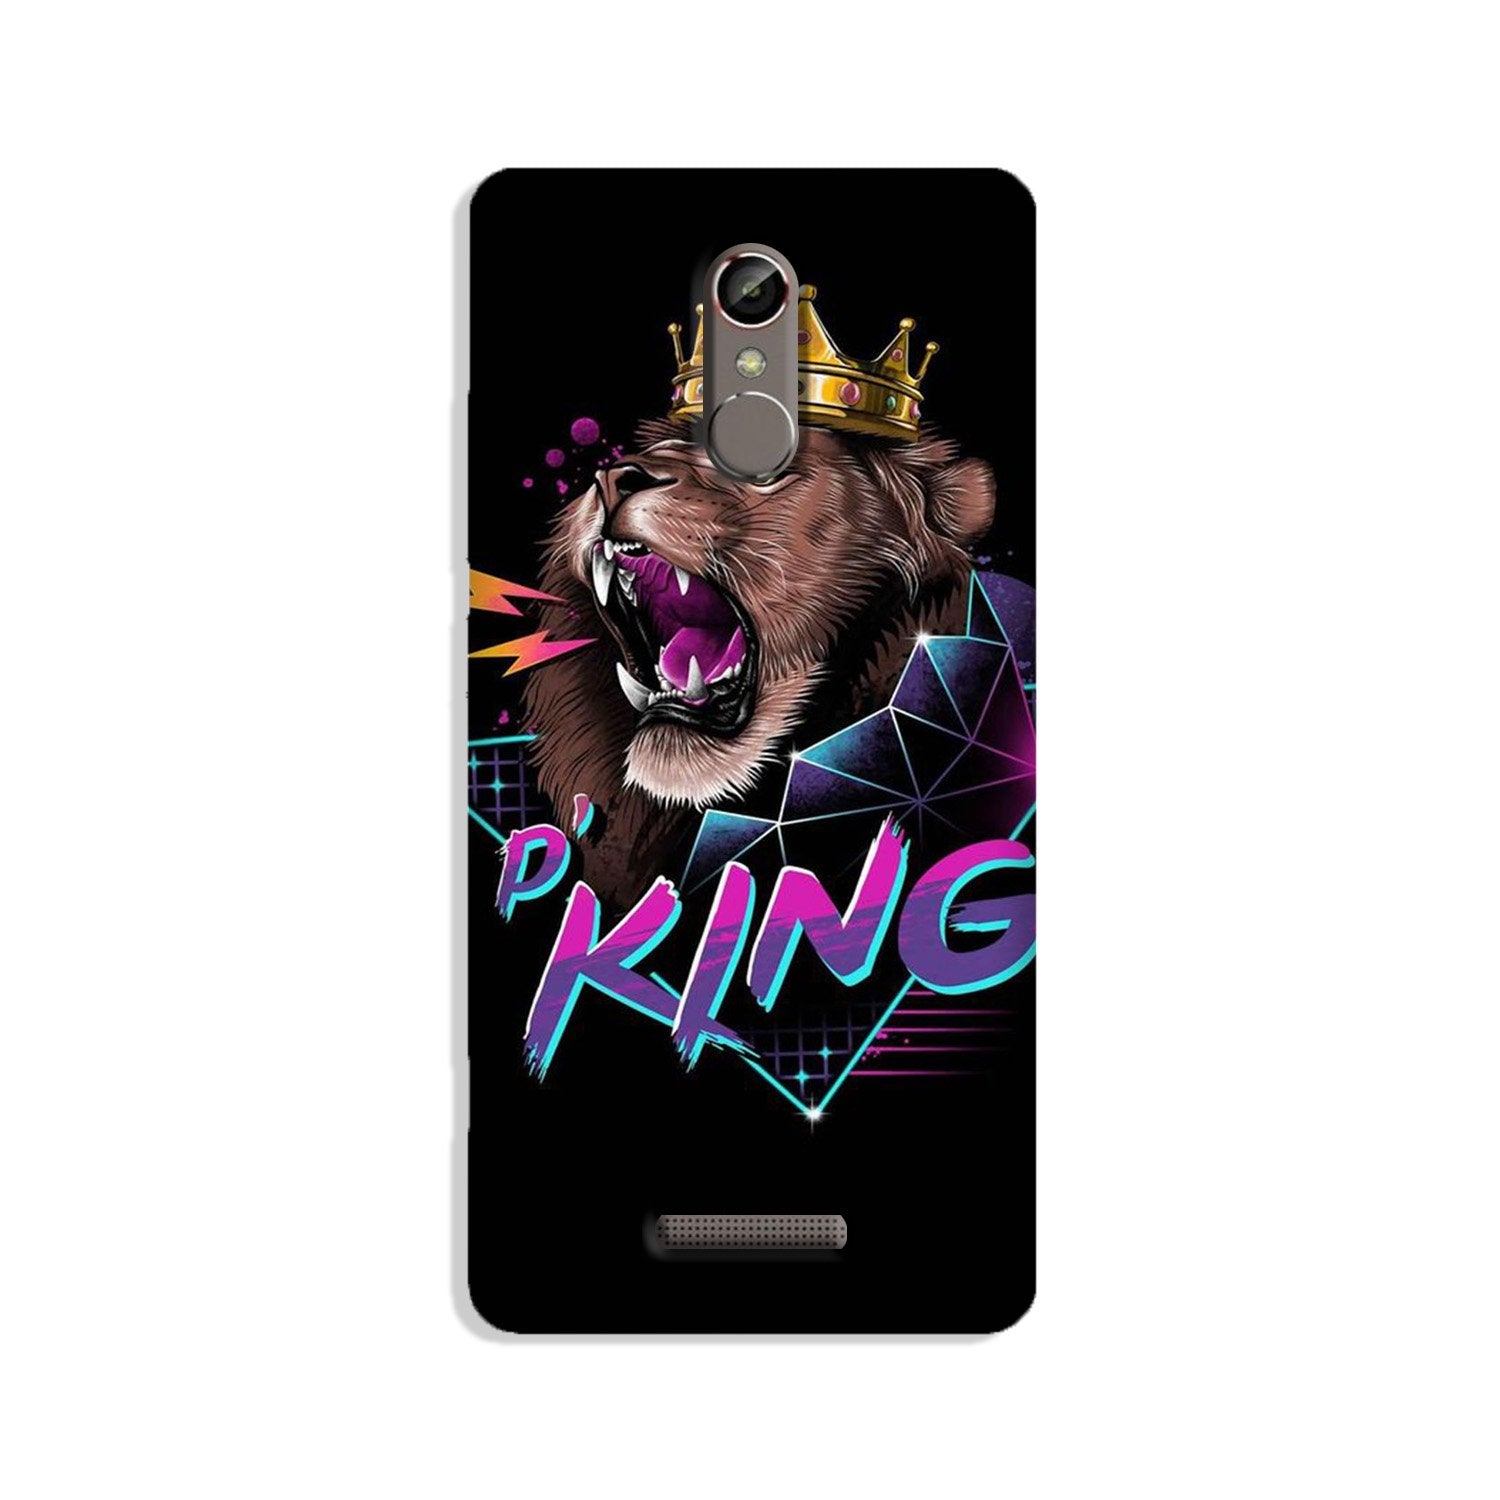 Lion King Case for Gionee S6s (Design No. 219)